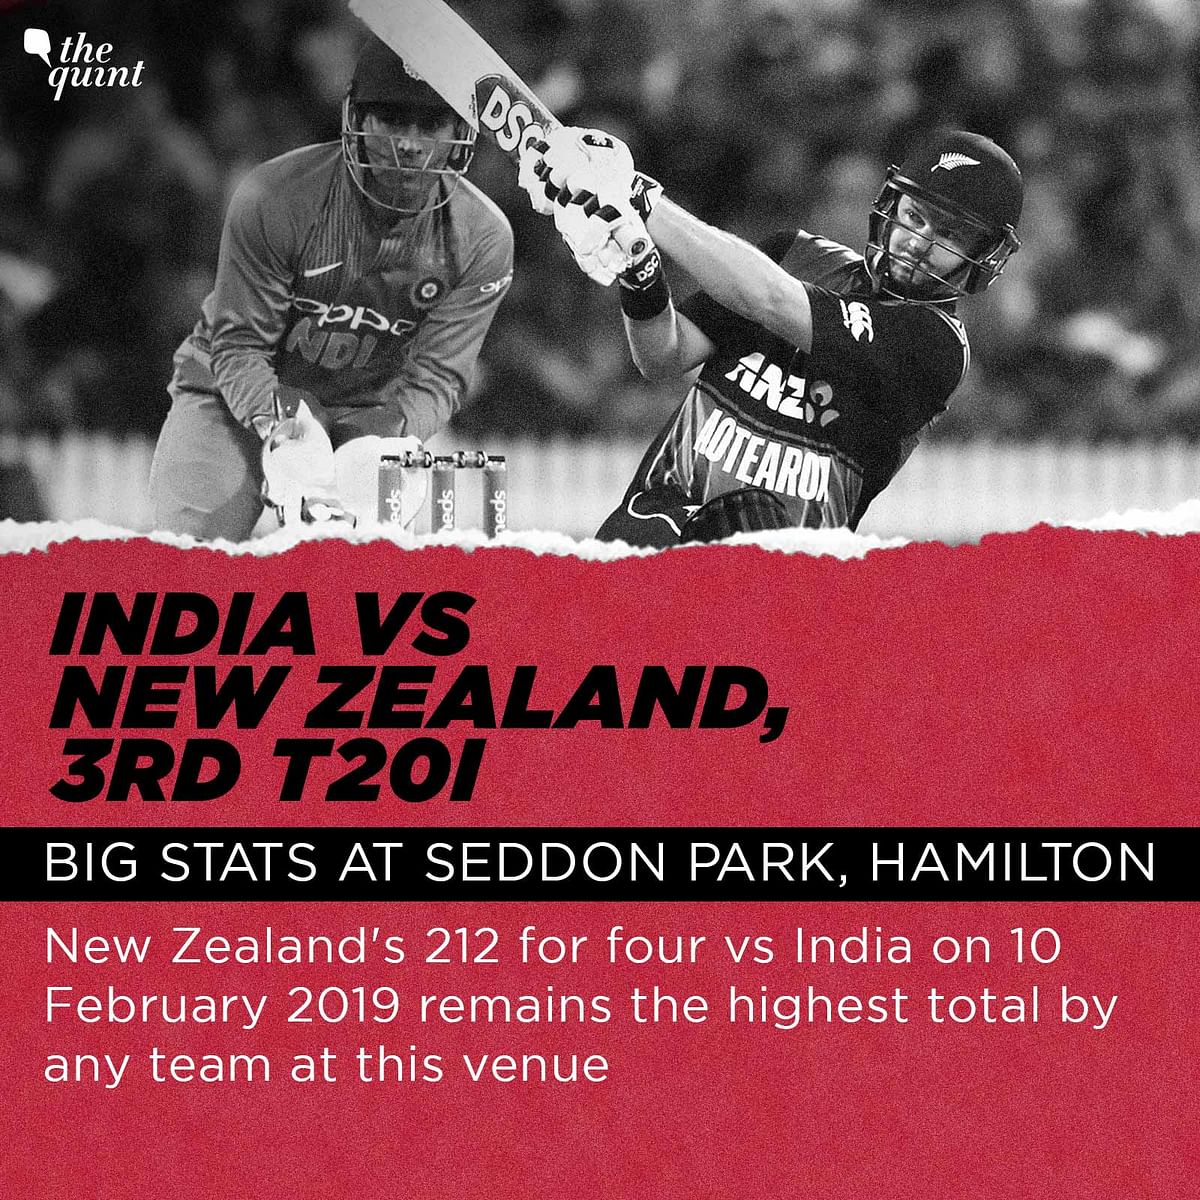 Here’s a look at some of the numbers and records in T20s from the Seddon Park in Hamilton.